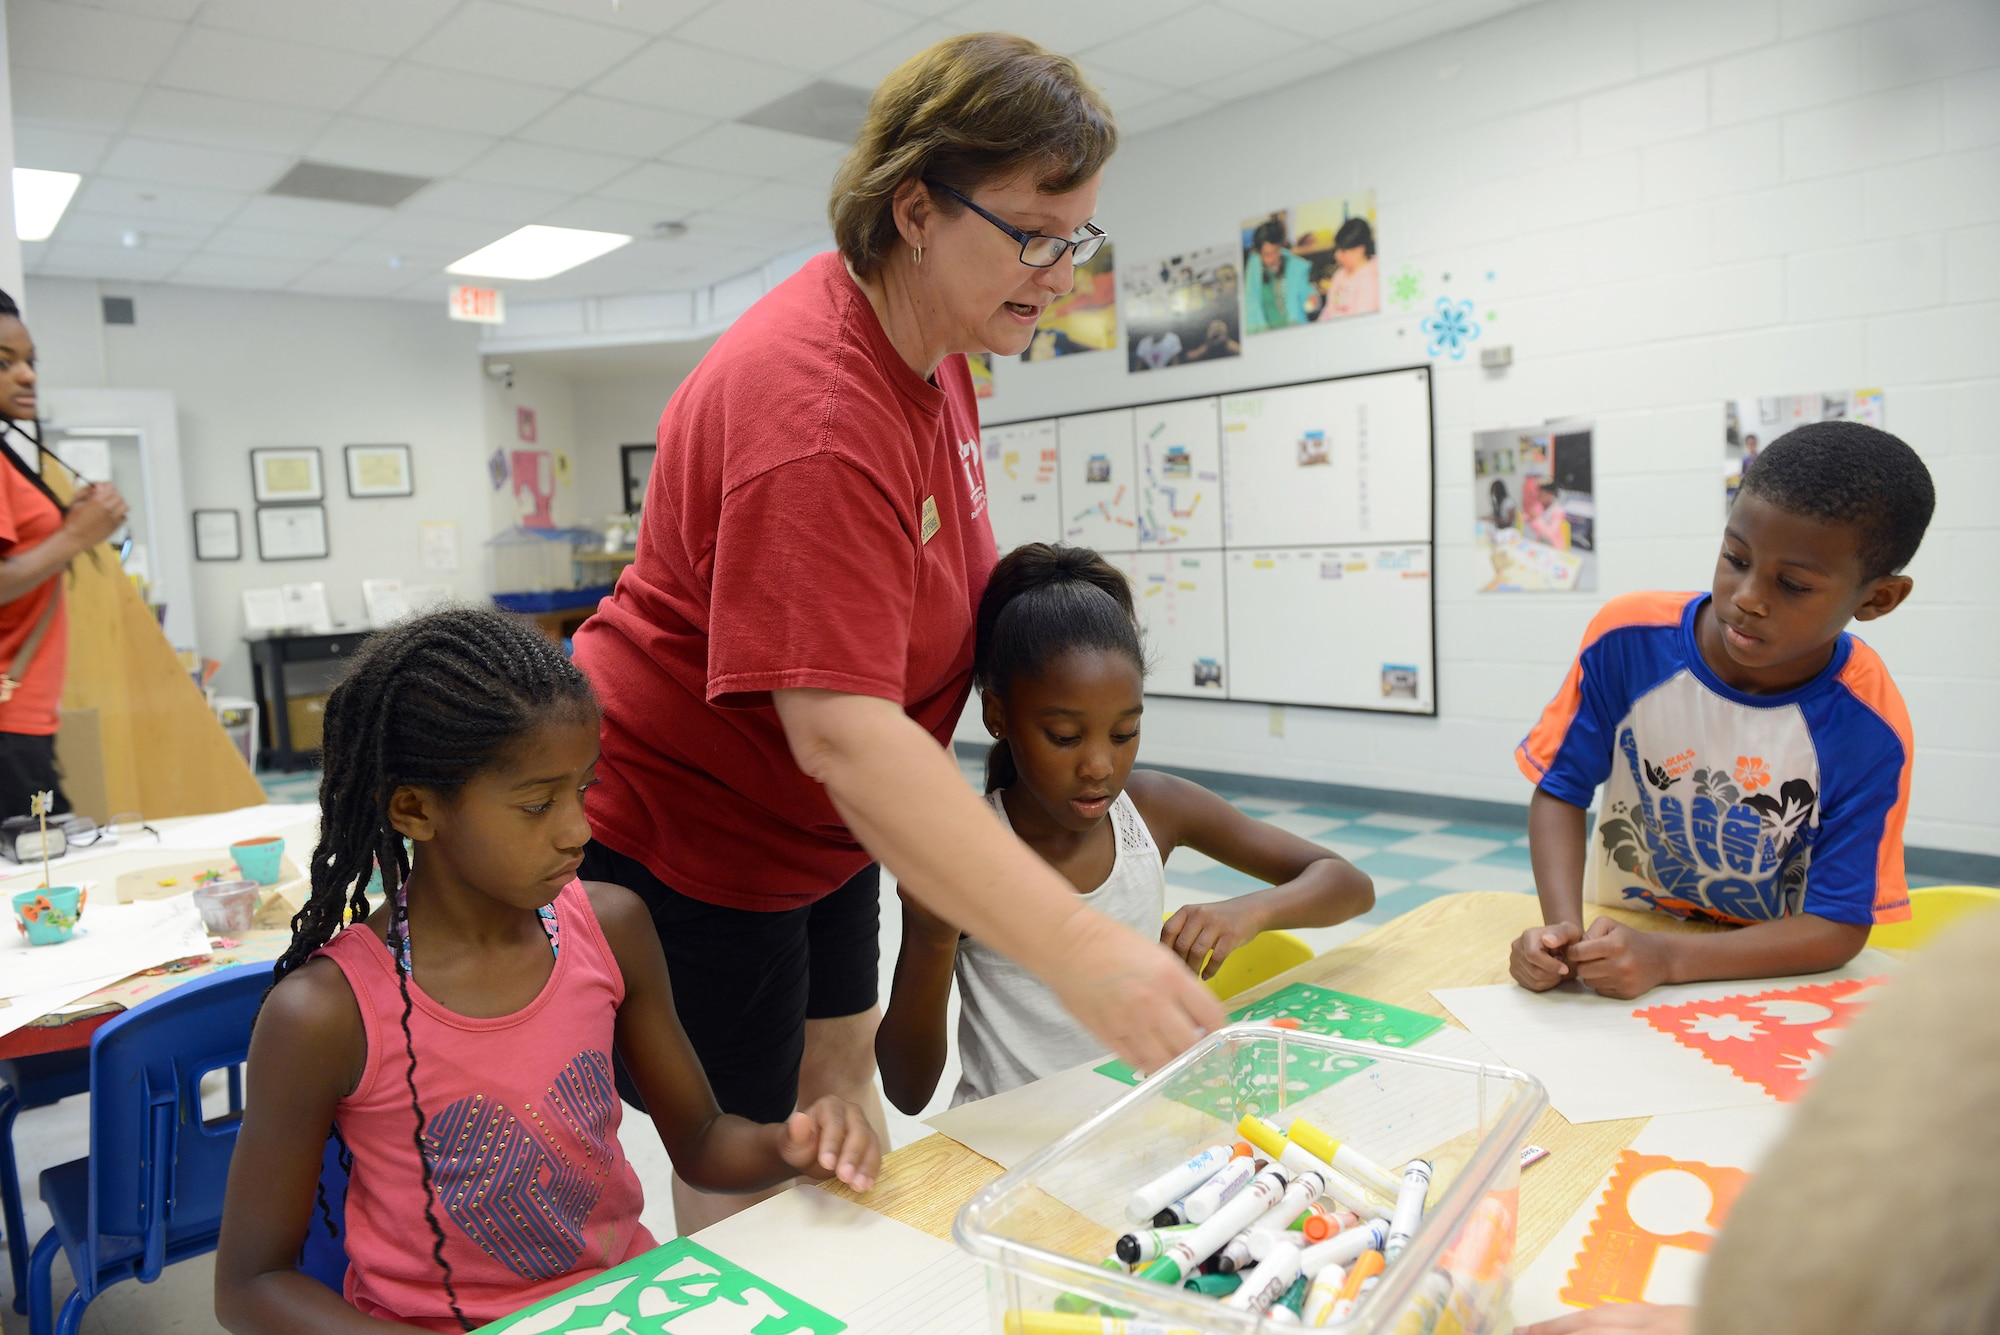 Marcia Gill, Robins Youth Center program assistant, leads activities for a group of youth at the facility. Beginning Aug. 3, the center will offer before-and after-school care for children between 5 and 12 years of age. (U.S. Air Force photo by Tommie Horton)